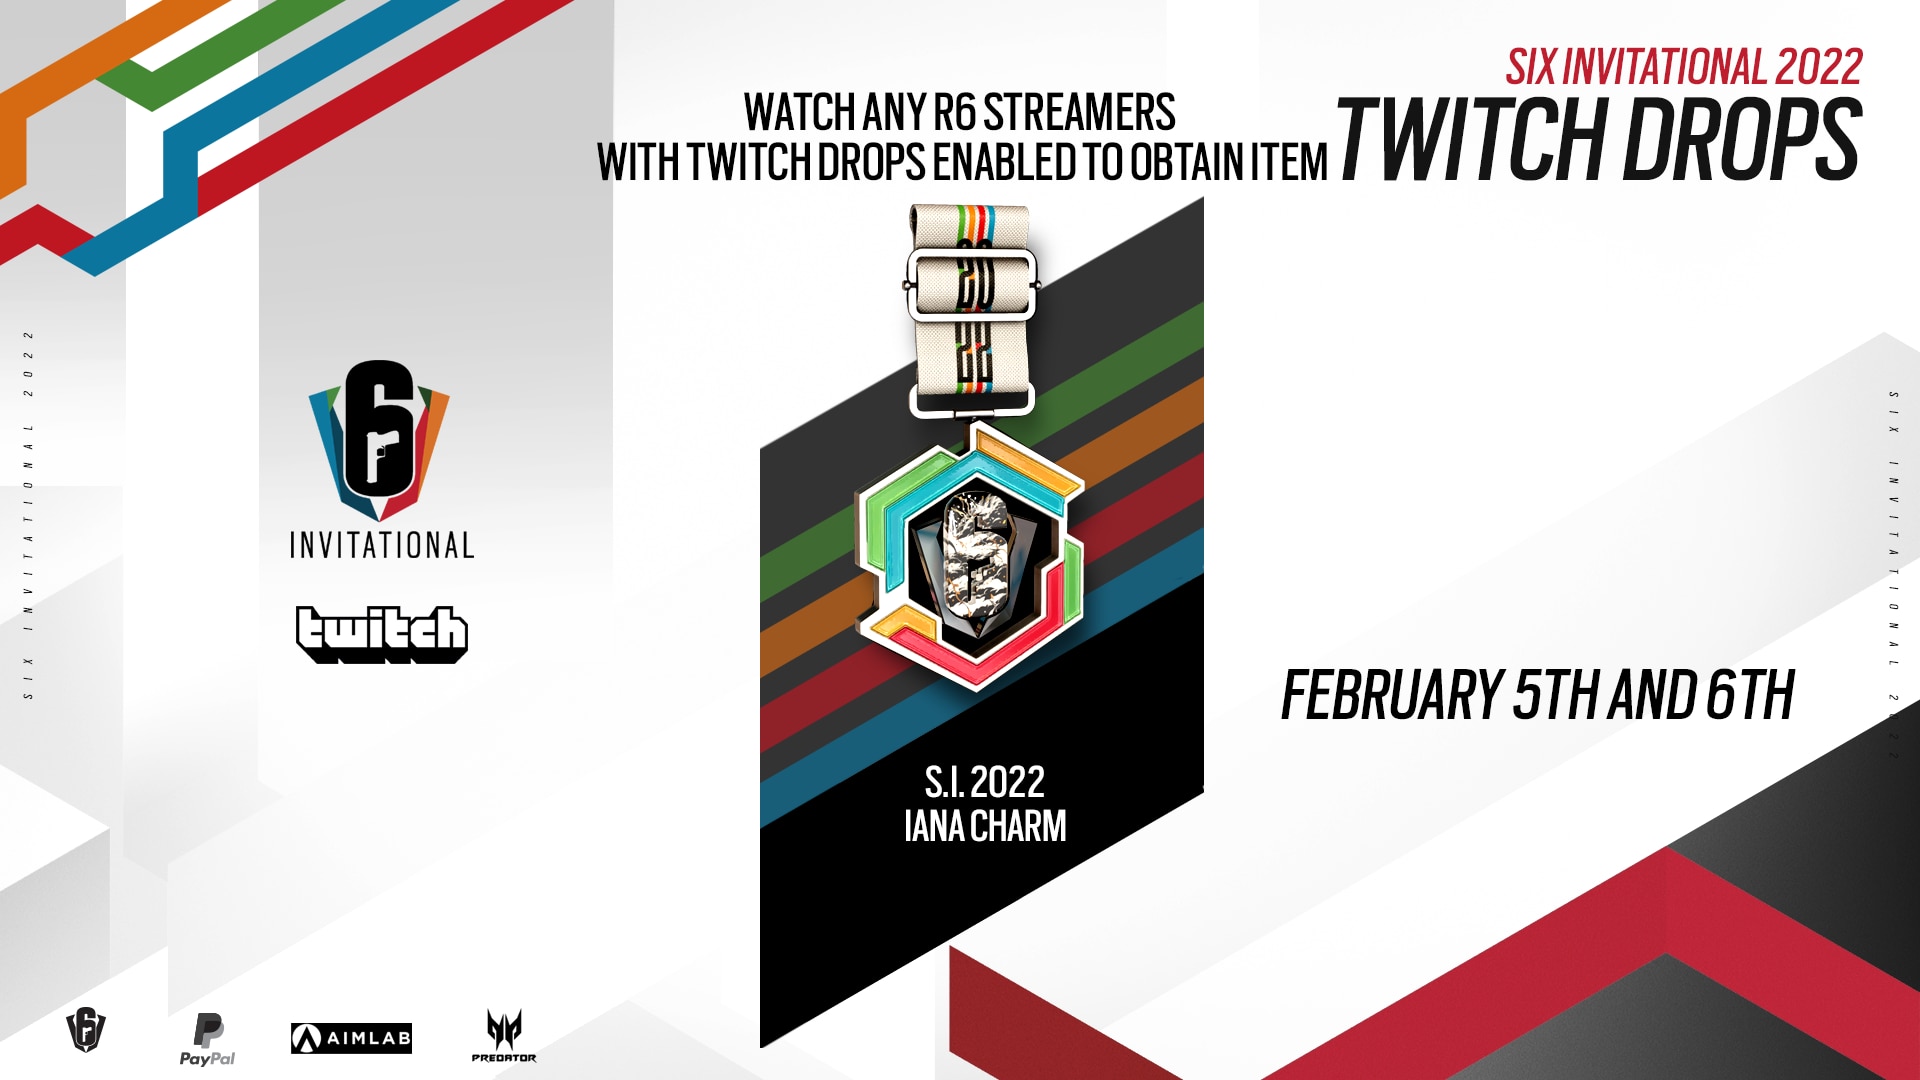 [R6SE] - Introducing the Twitch Drops Program for the Six Invitational 2022 - Universal Streamer Drops